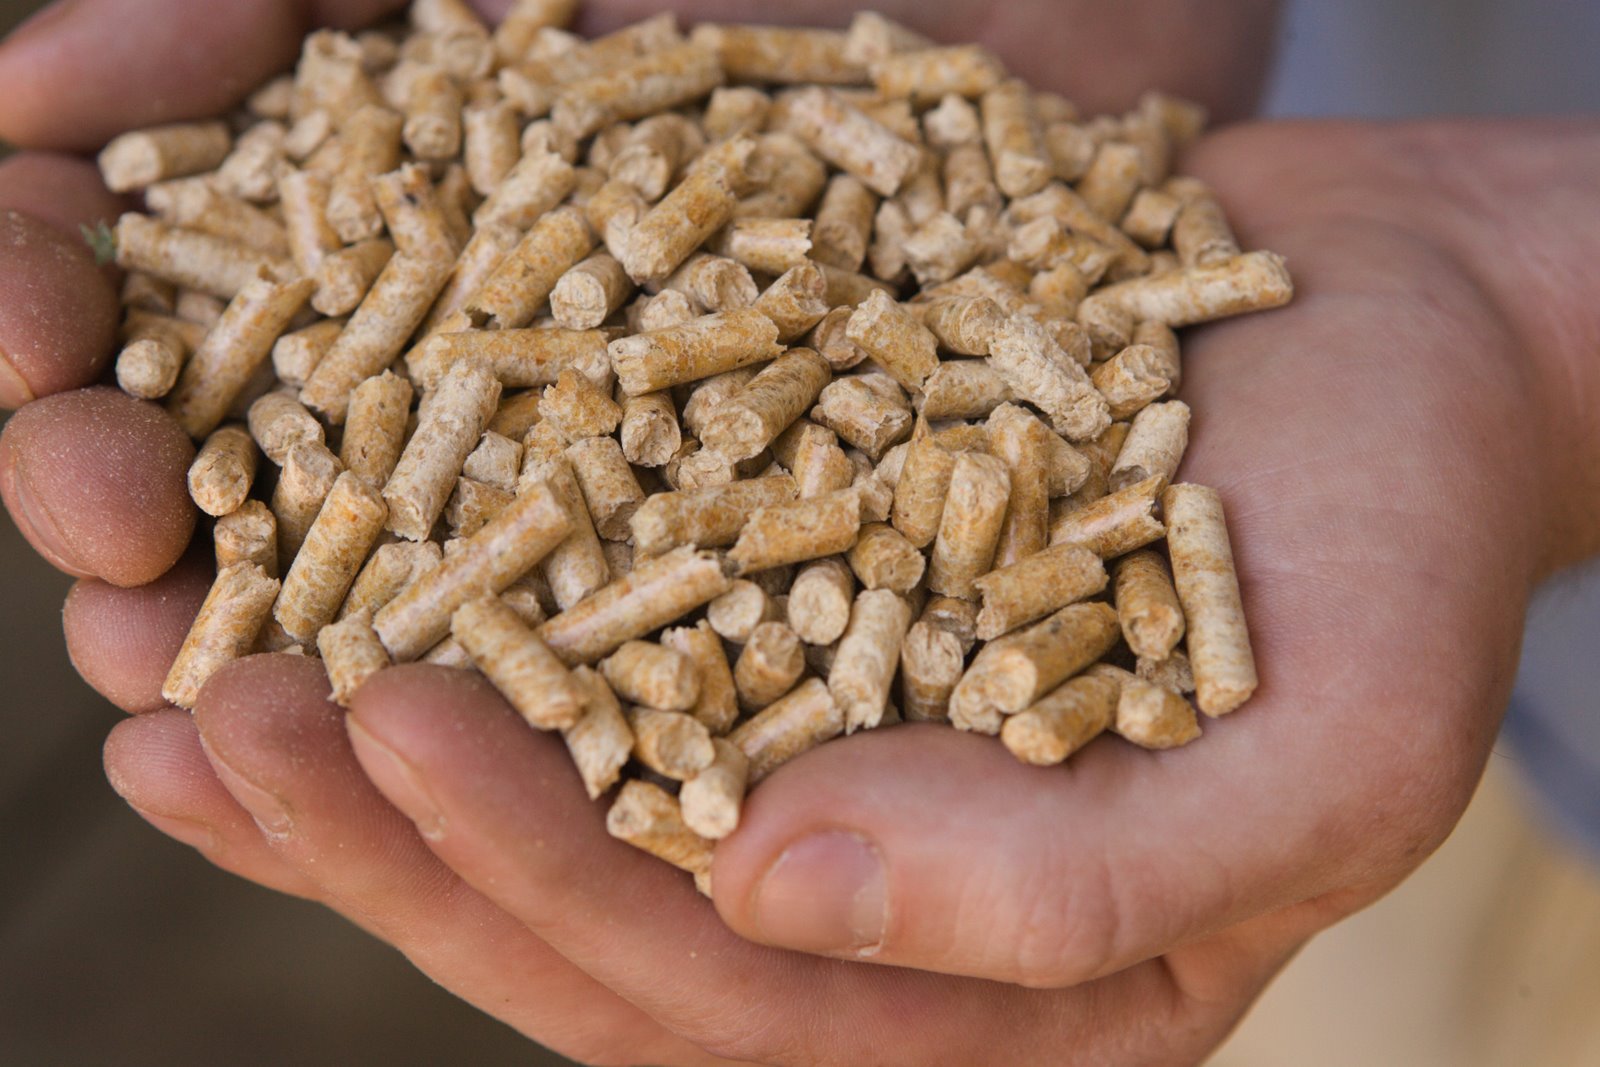 A pile of wood pellets held in a person's hands. Wood pellet prices continue to soar in Europe due to Russia's continuing war with Ukraine.